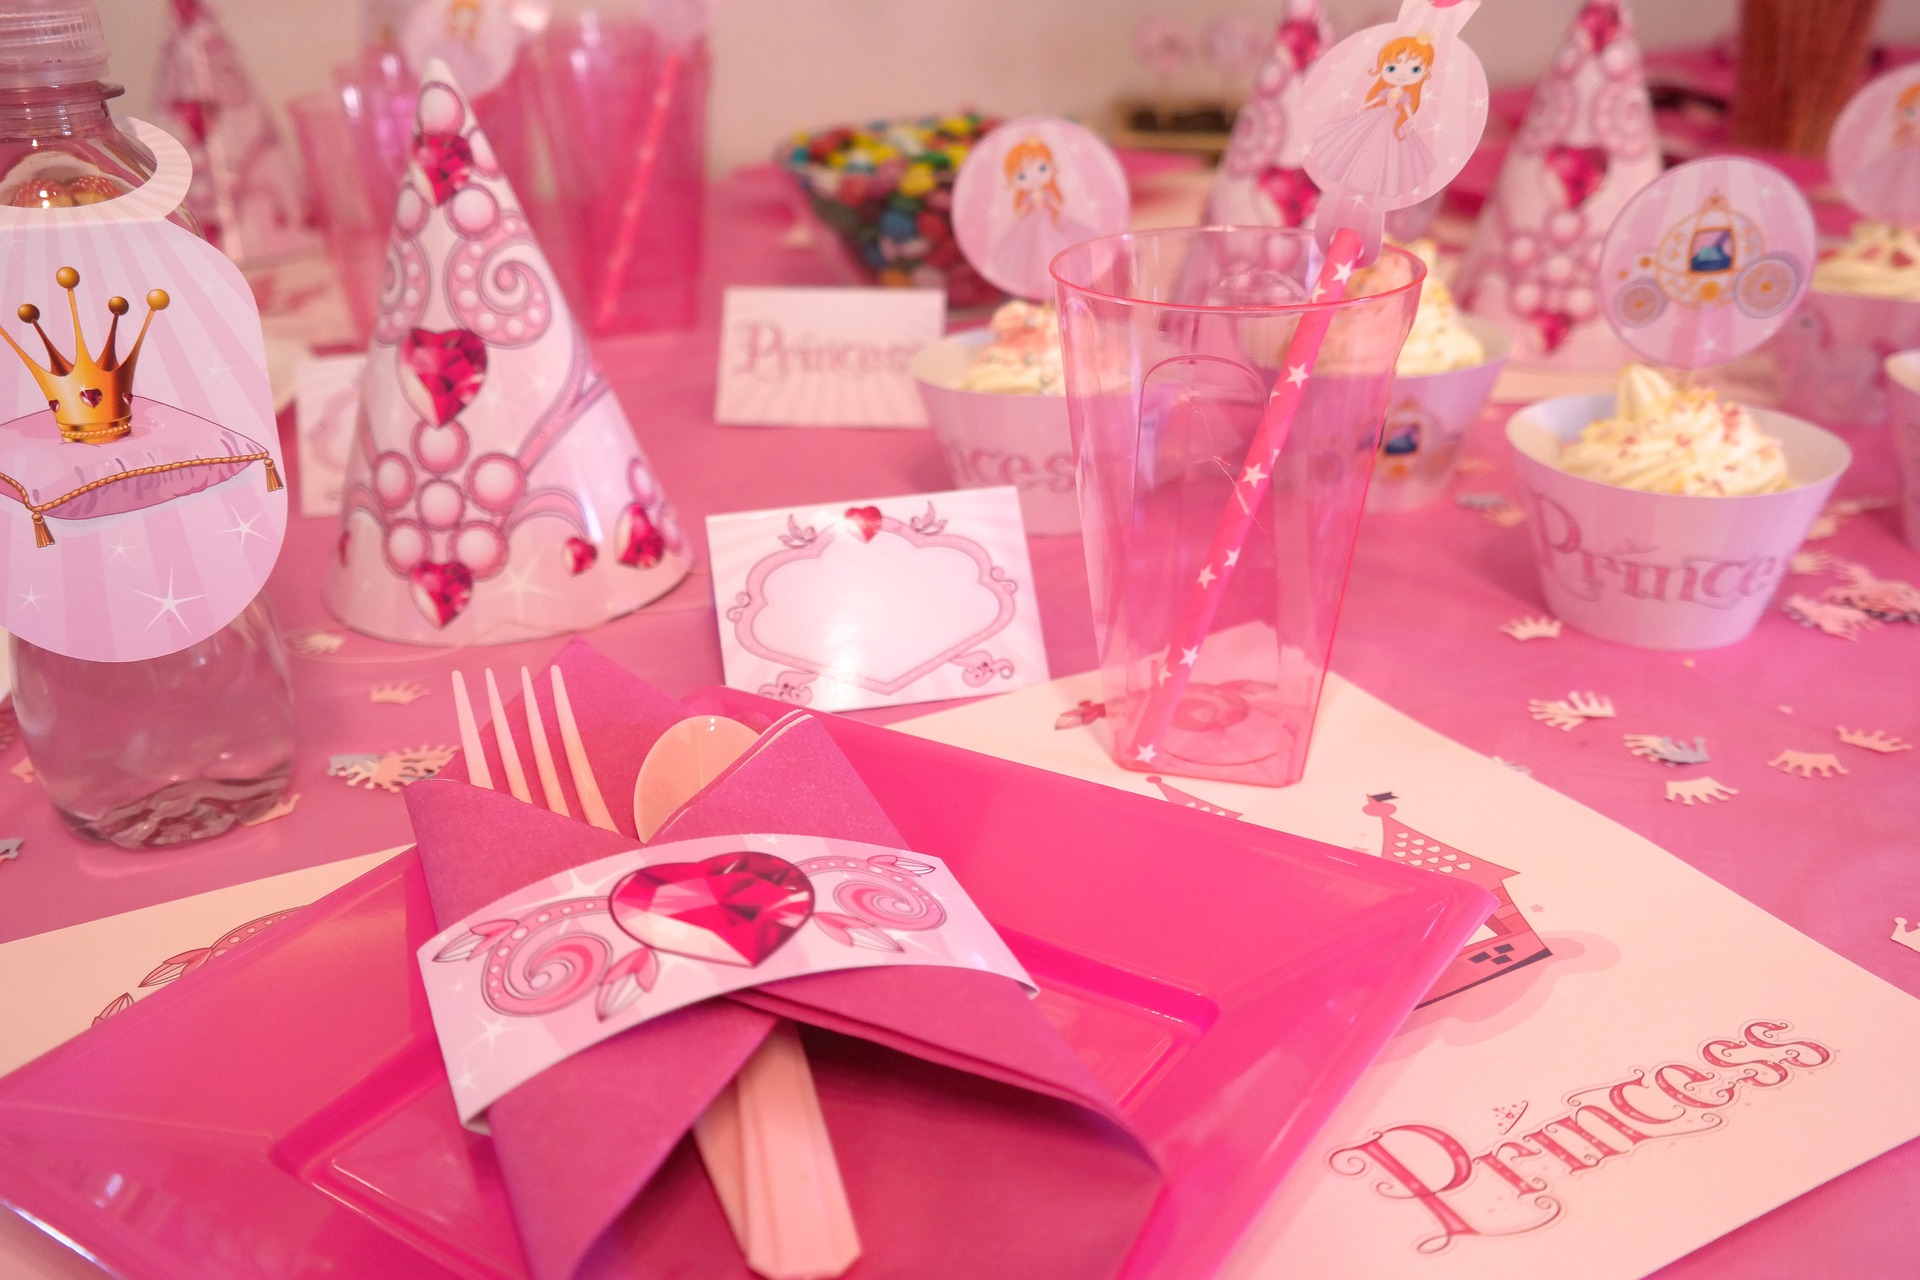 A pink table setting with pictures of princesses, crowns and jewels.